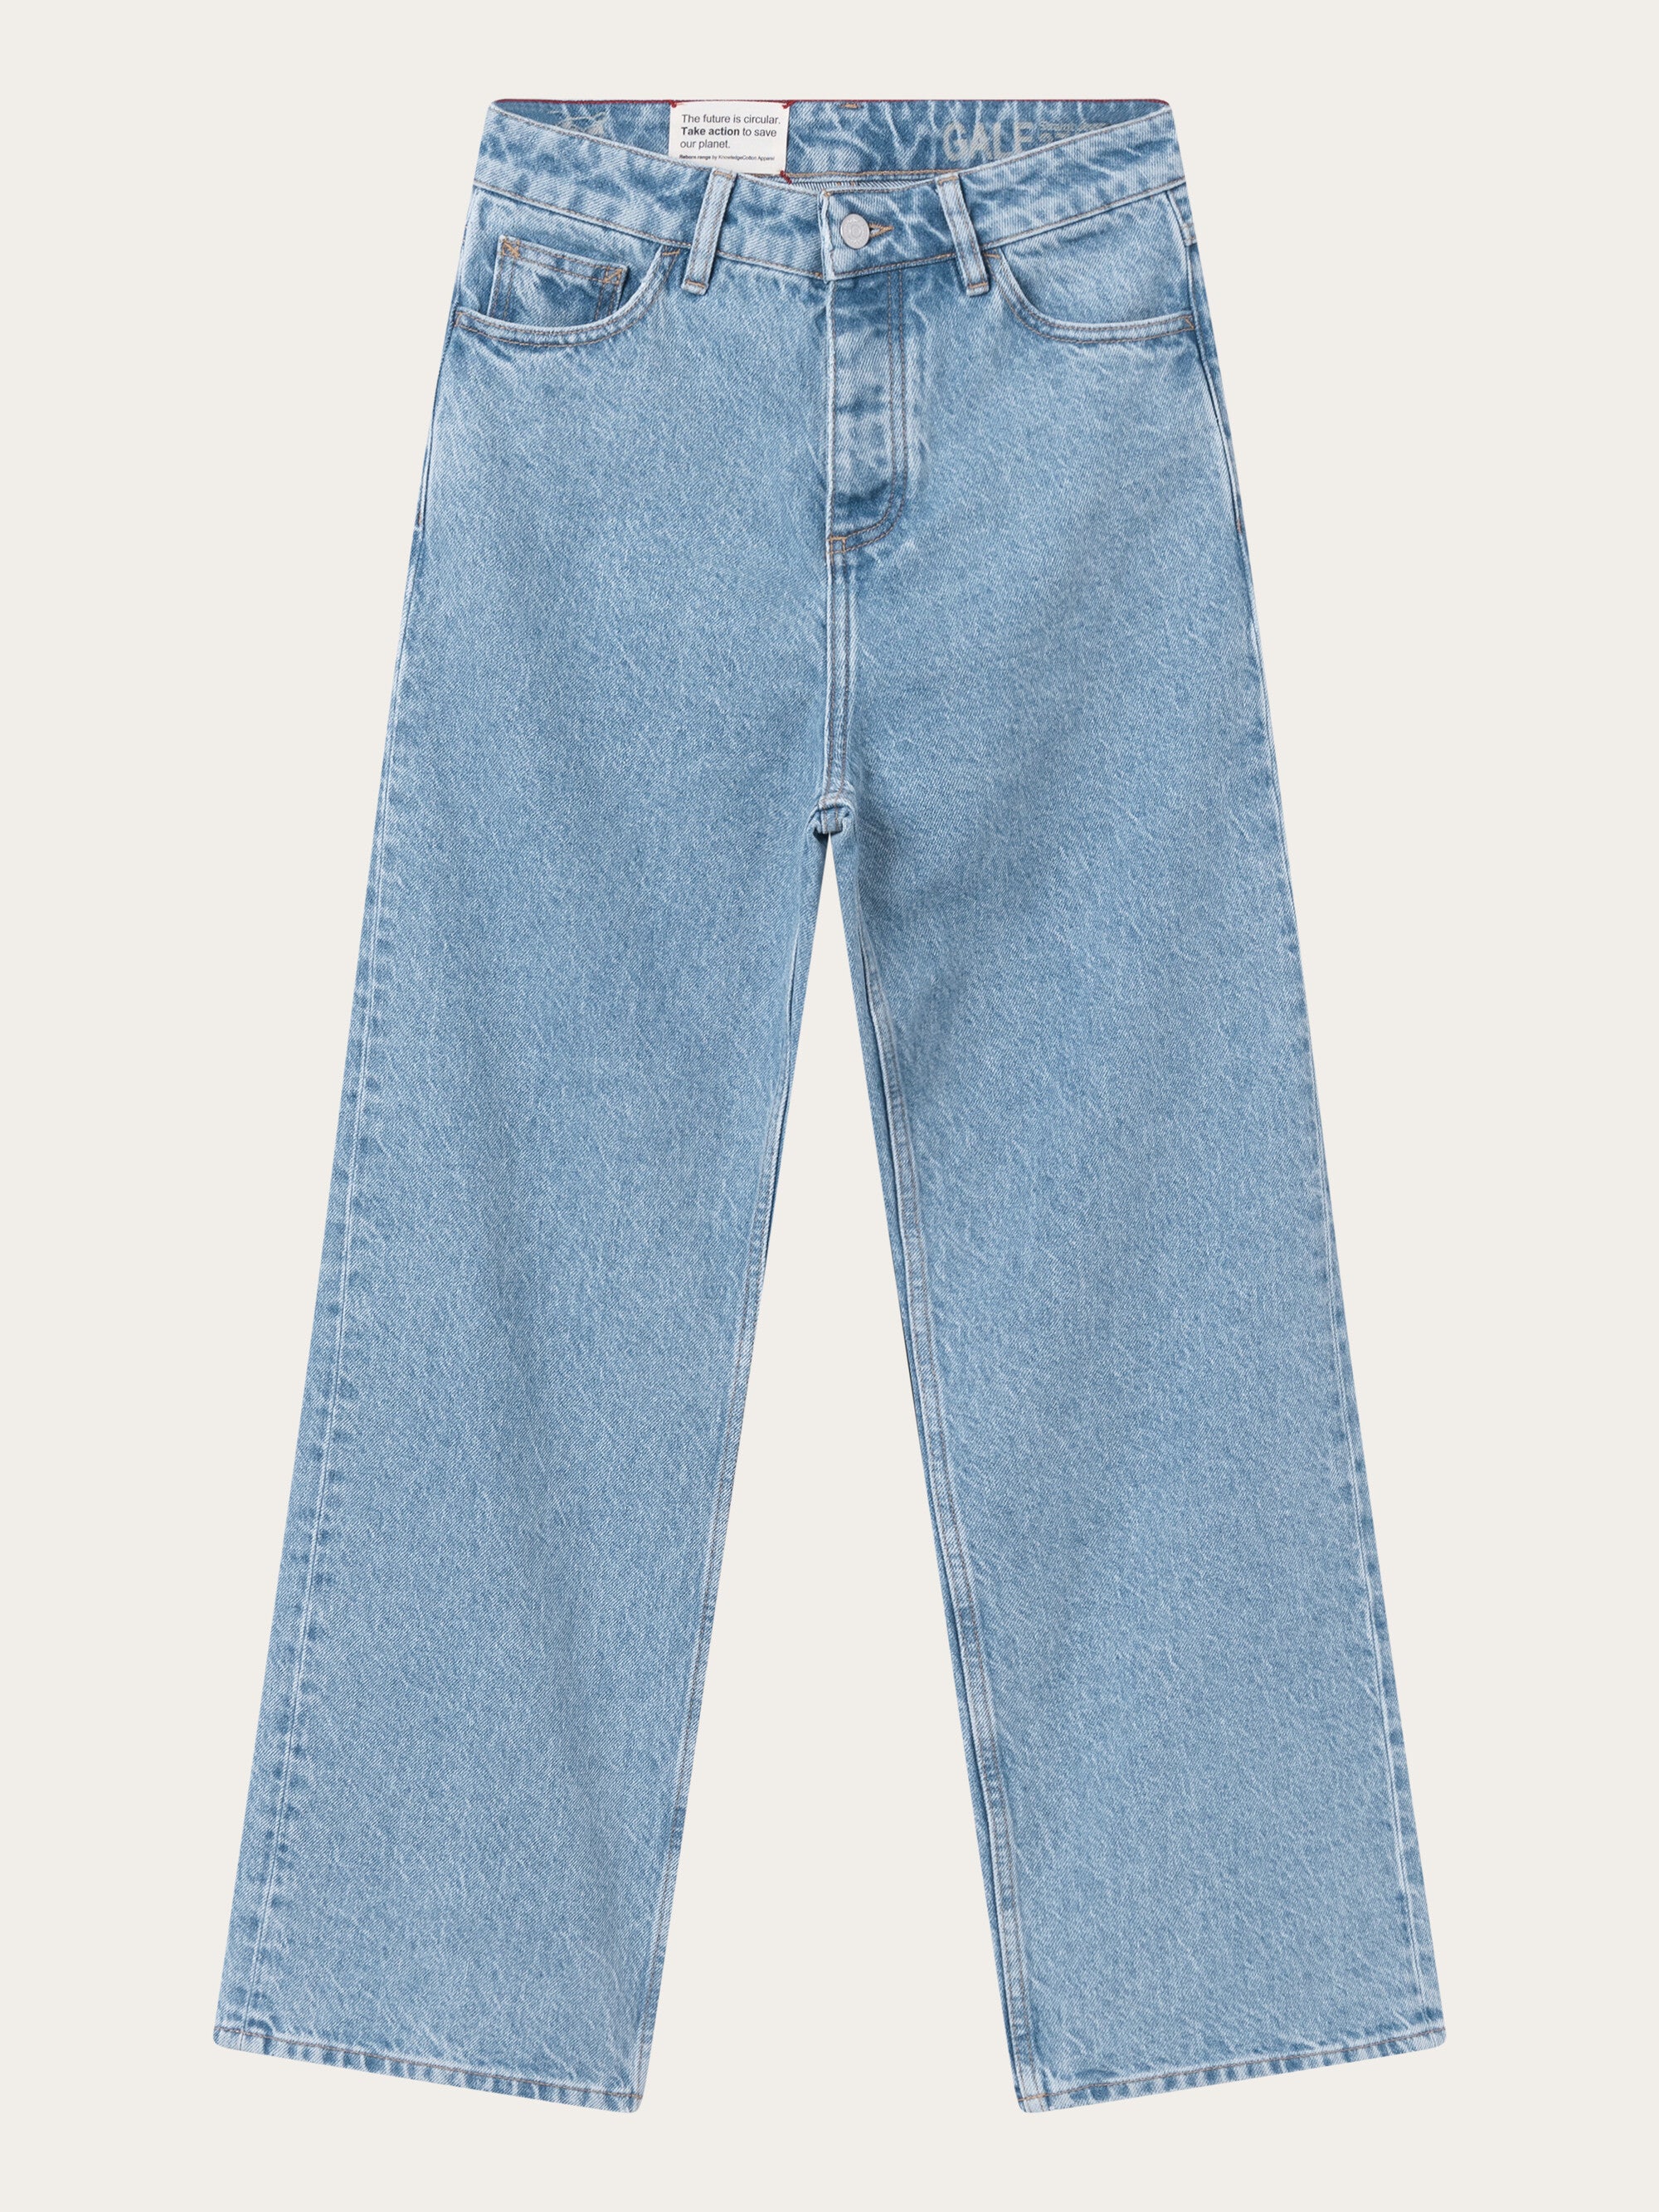 Buy GALE straight mid-rise bleached stonewash 5-pocket jeans REBORN -  Bleached Stonewash - from KnowledgeCotton Apparel®